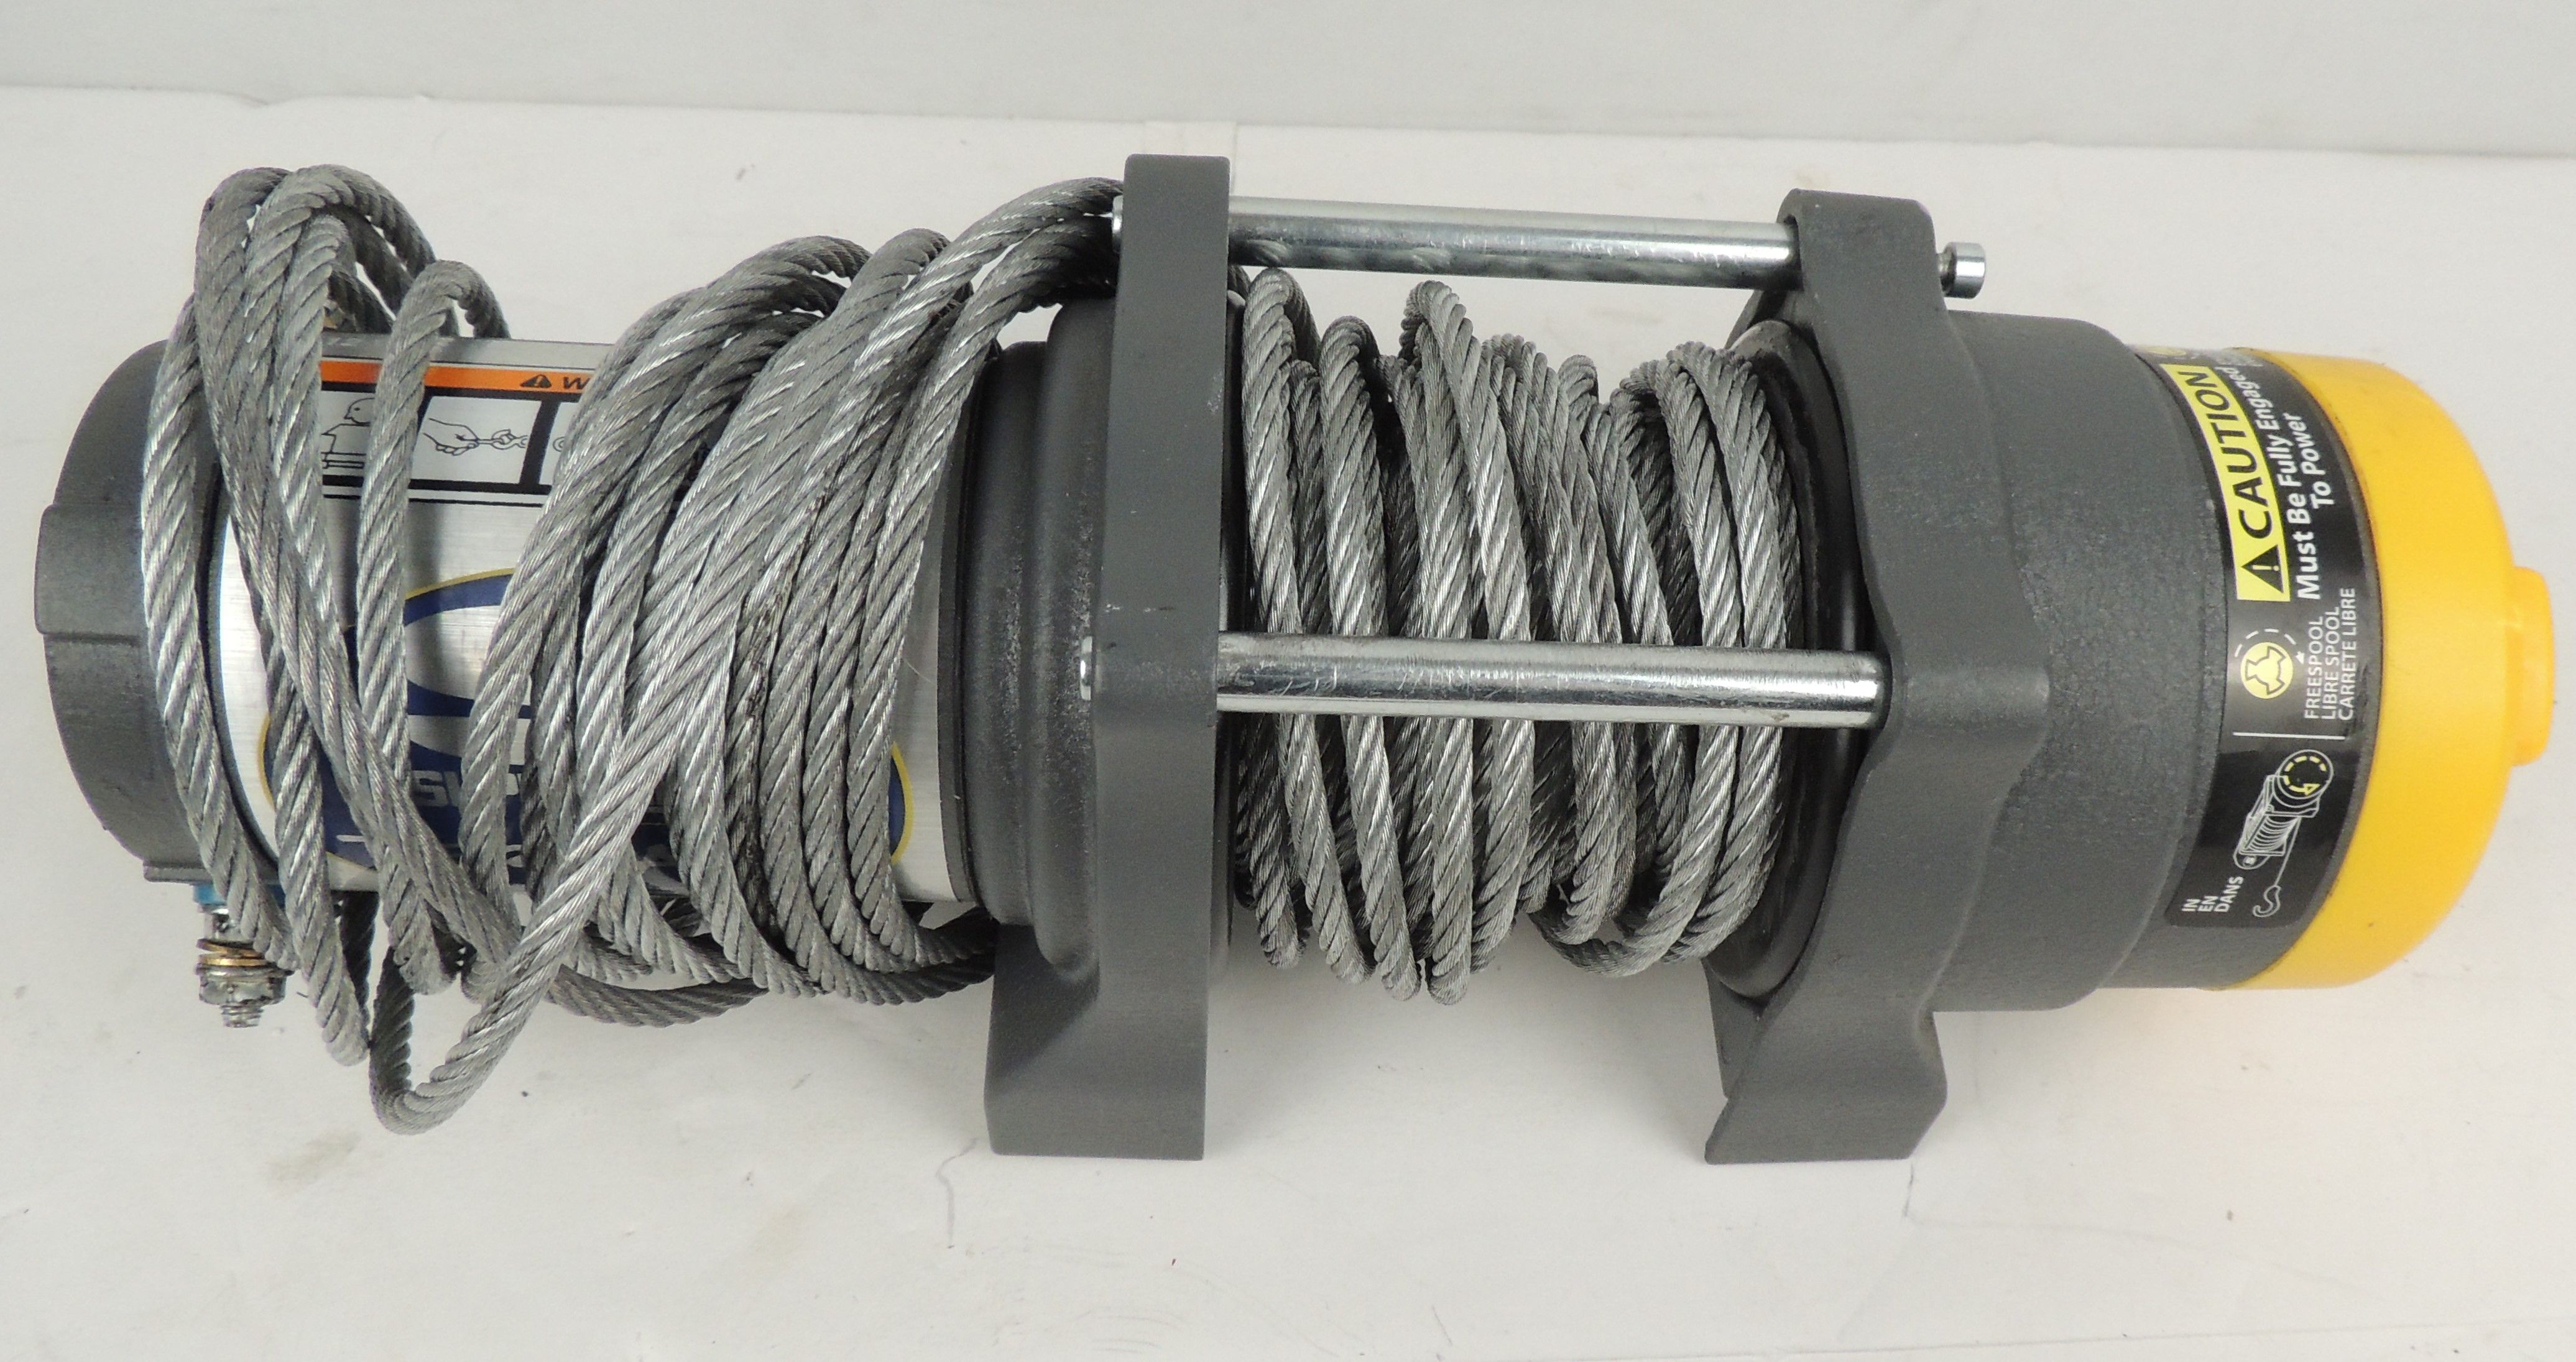 SUPERWENCH 1135220 Terra 35 12V 3500 lbs Capacity 50' x 3/16" Steel Rope